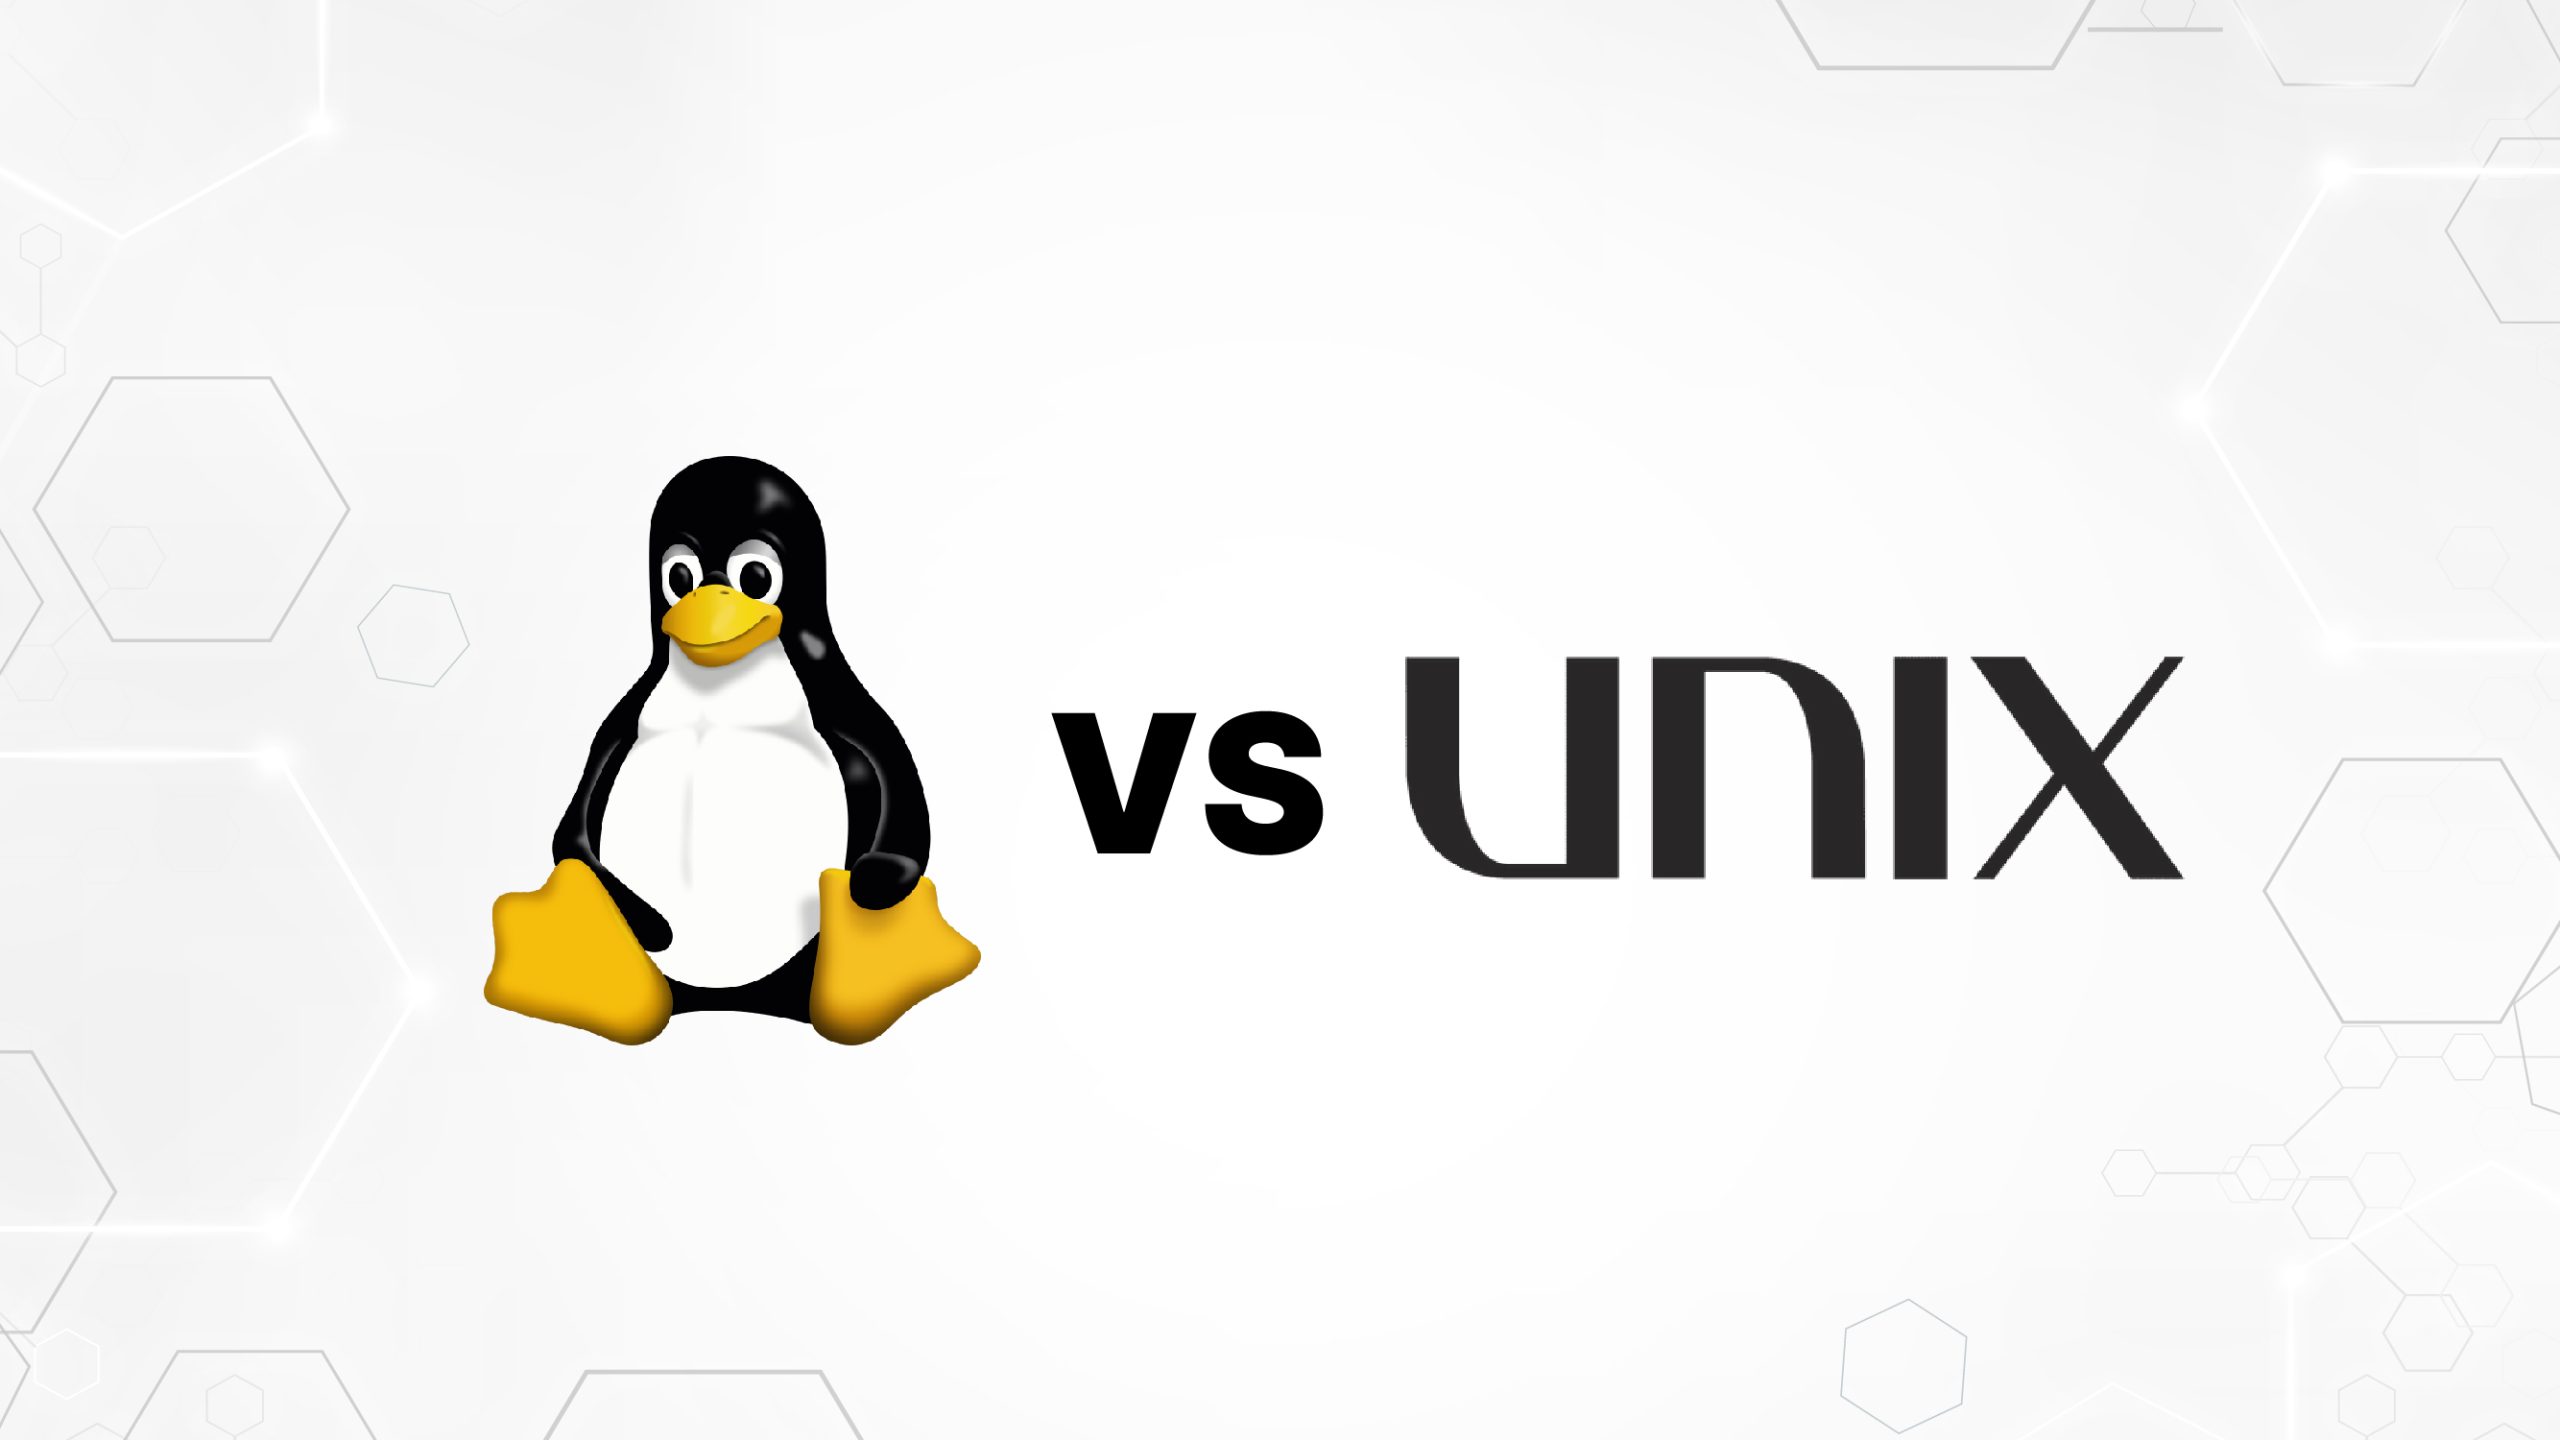 Unix and Linux